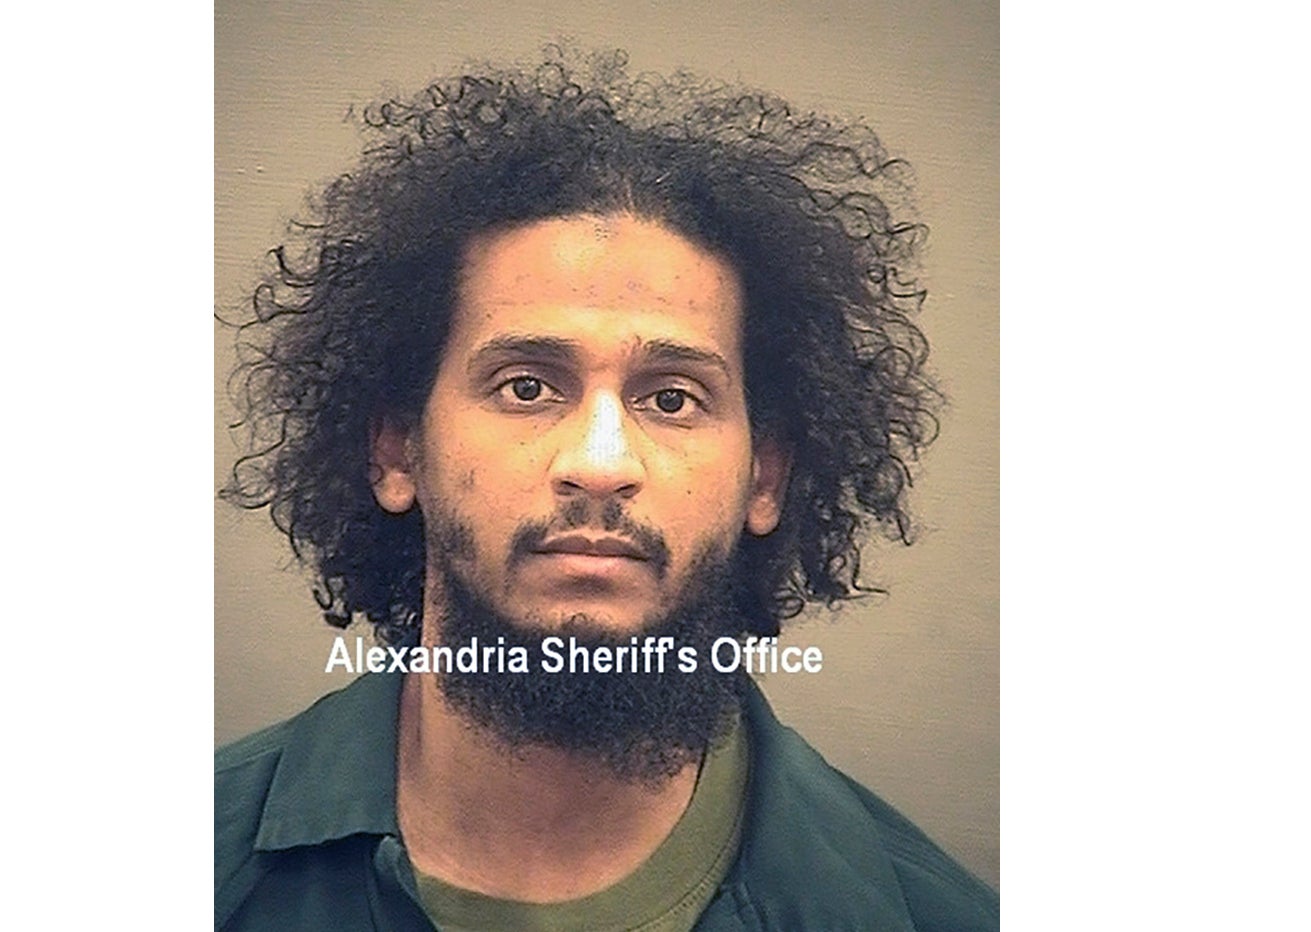 El Shafee Elsheikh was handed eight concurrent life sentences on Friday at a US federal court in Virginia (Alexandria Sheriff’s Office via AP)